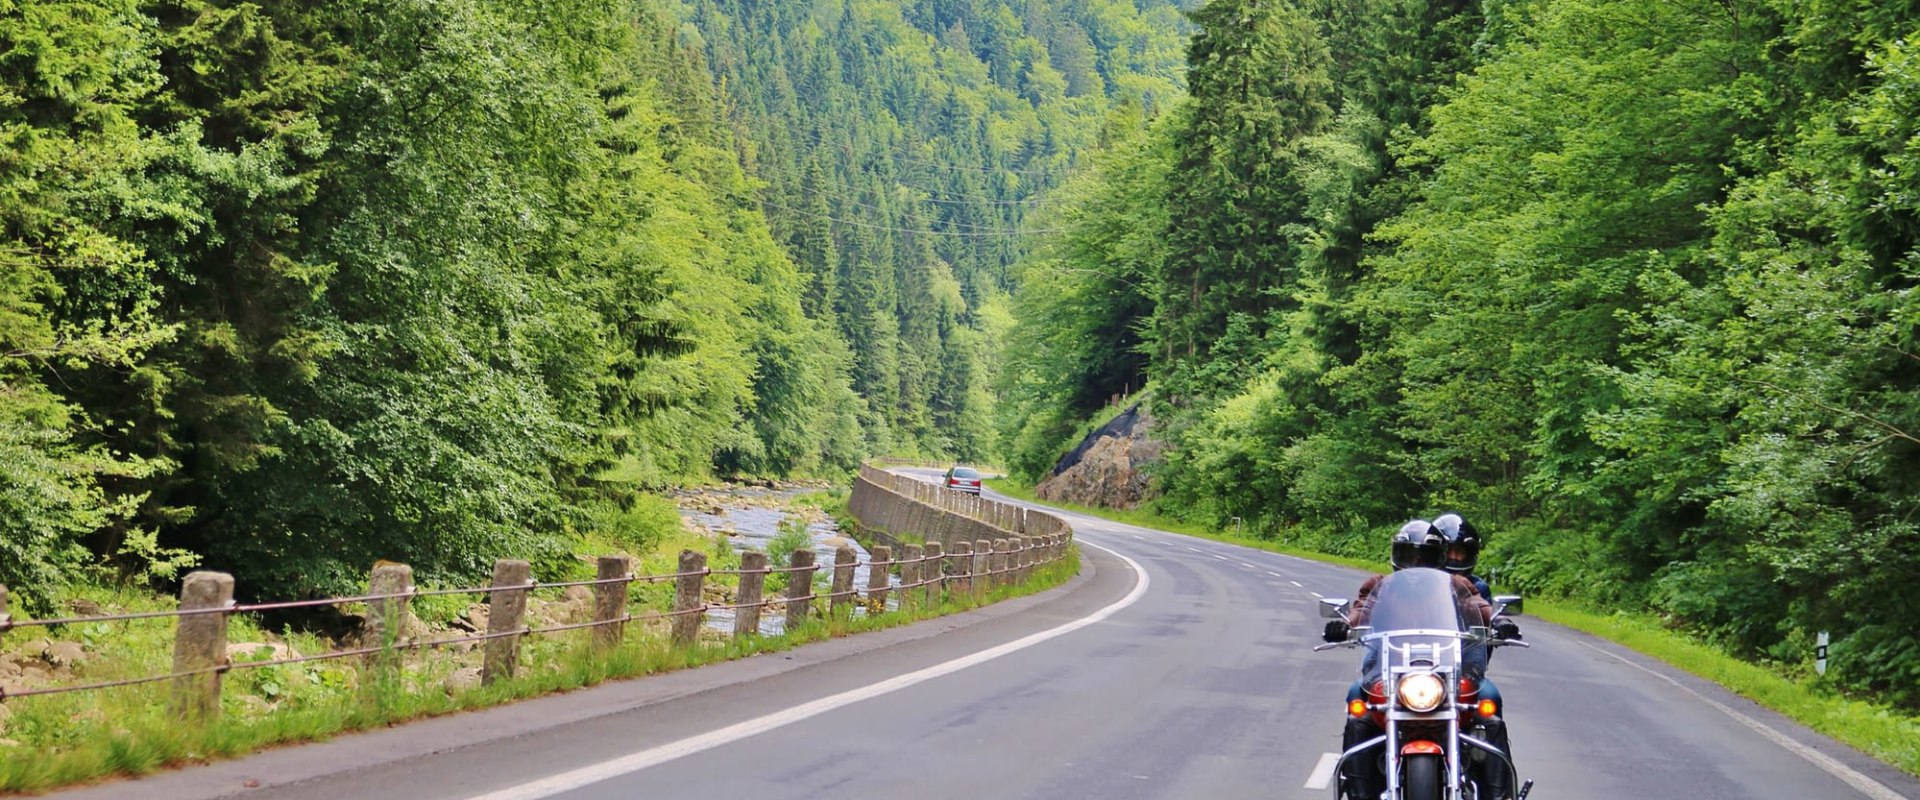 Motorcycle Insurance Companies in Maryland